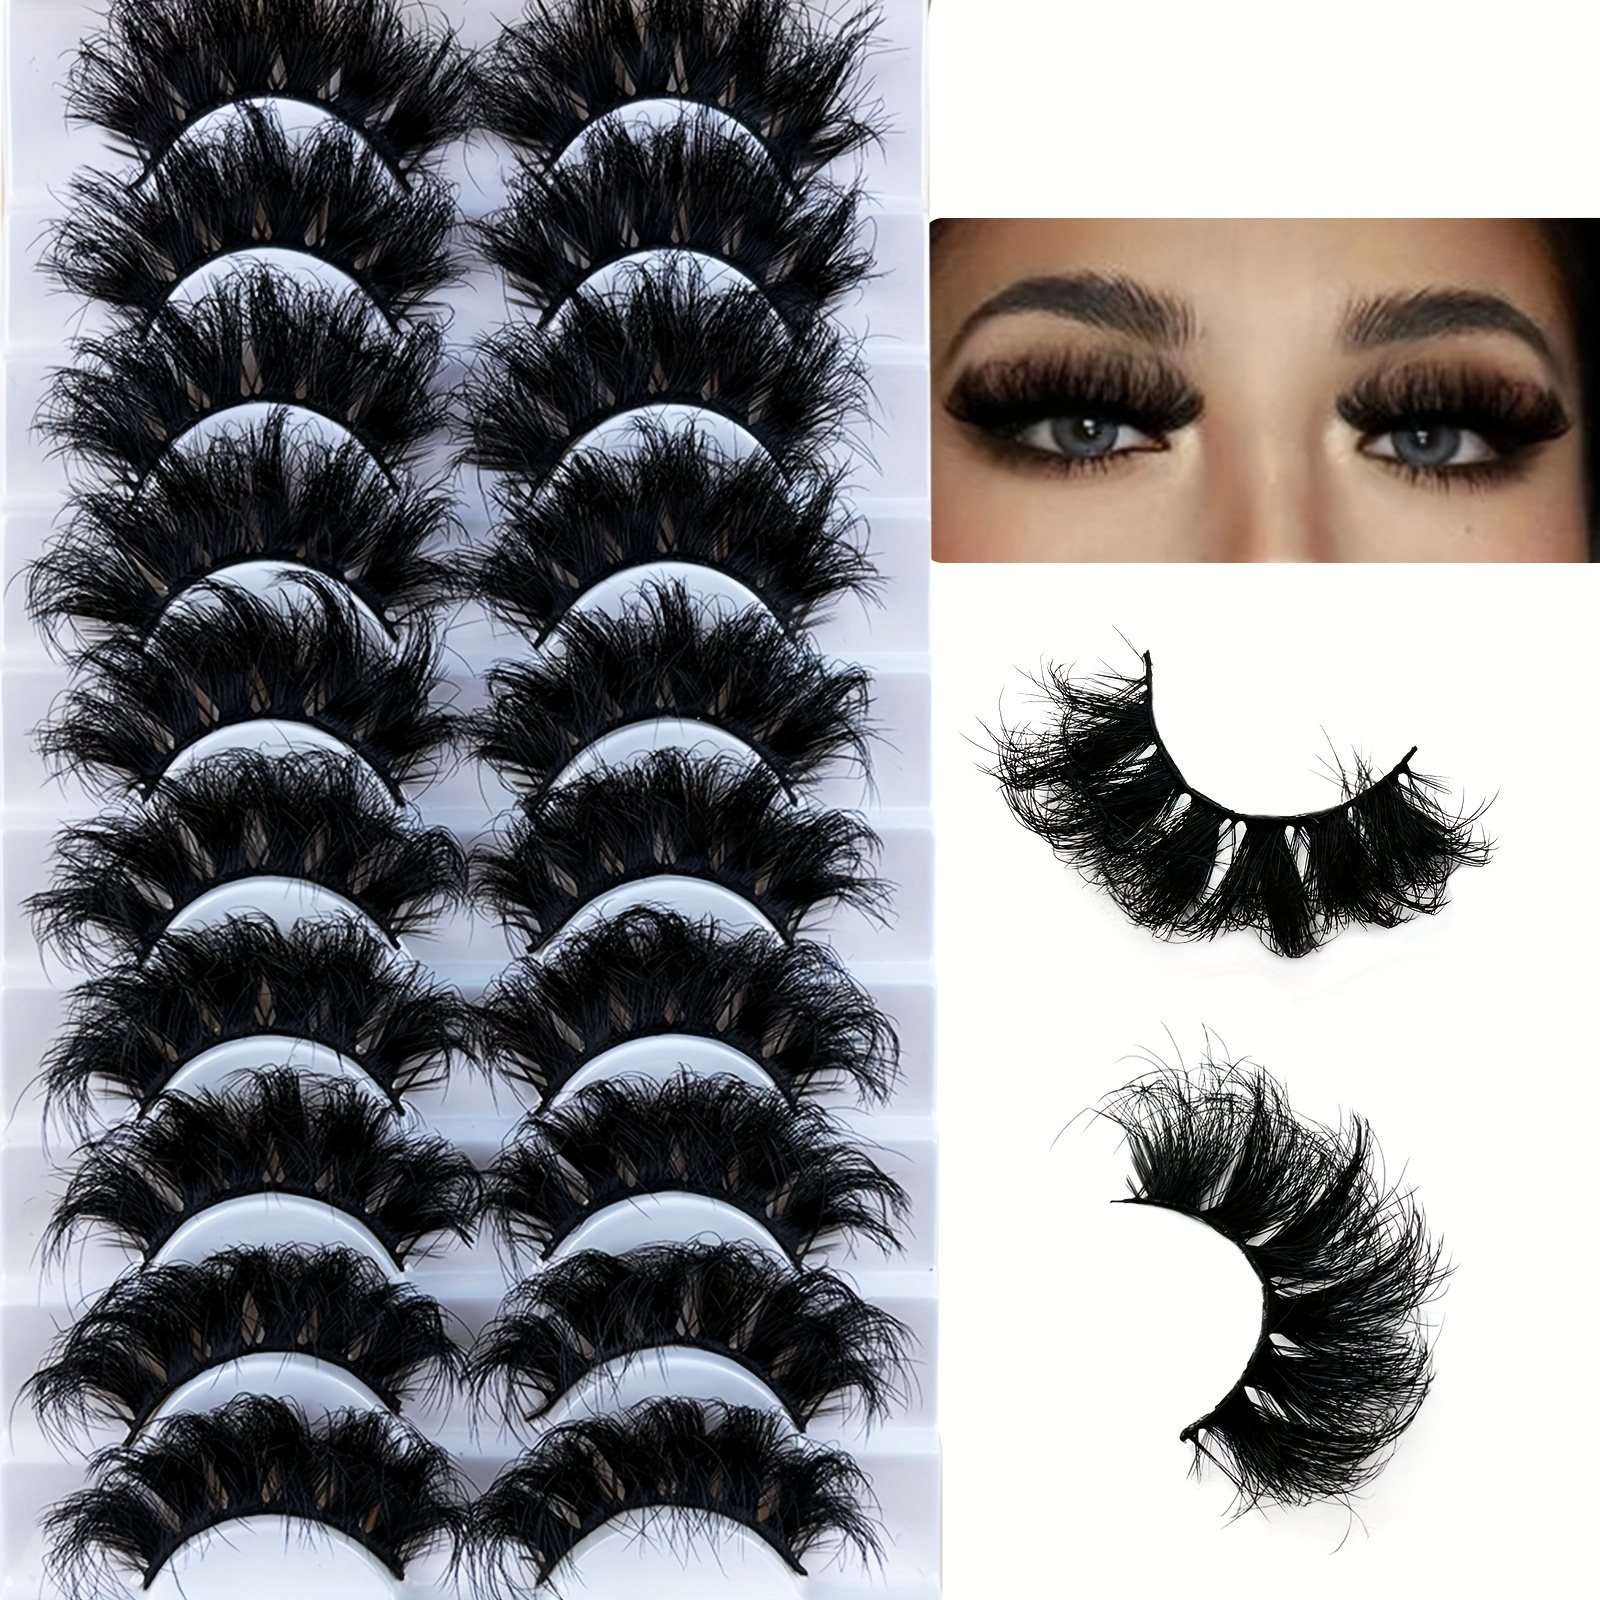 

10 Pairs Of False Eyelashes, Thick Cross Fluffy Russian Strip Curly D Daily Makeup Eye Lashes Extension, Dramatic Look